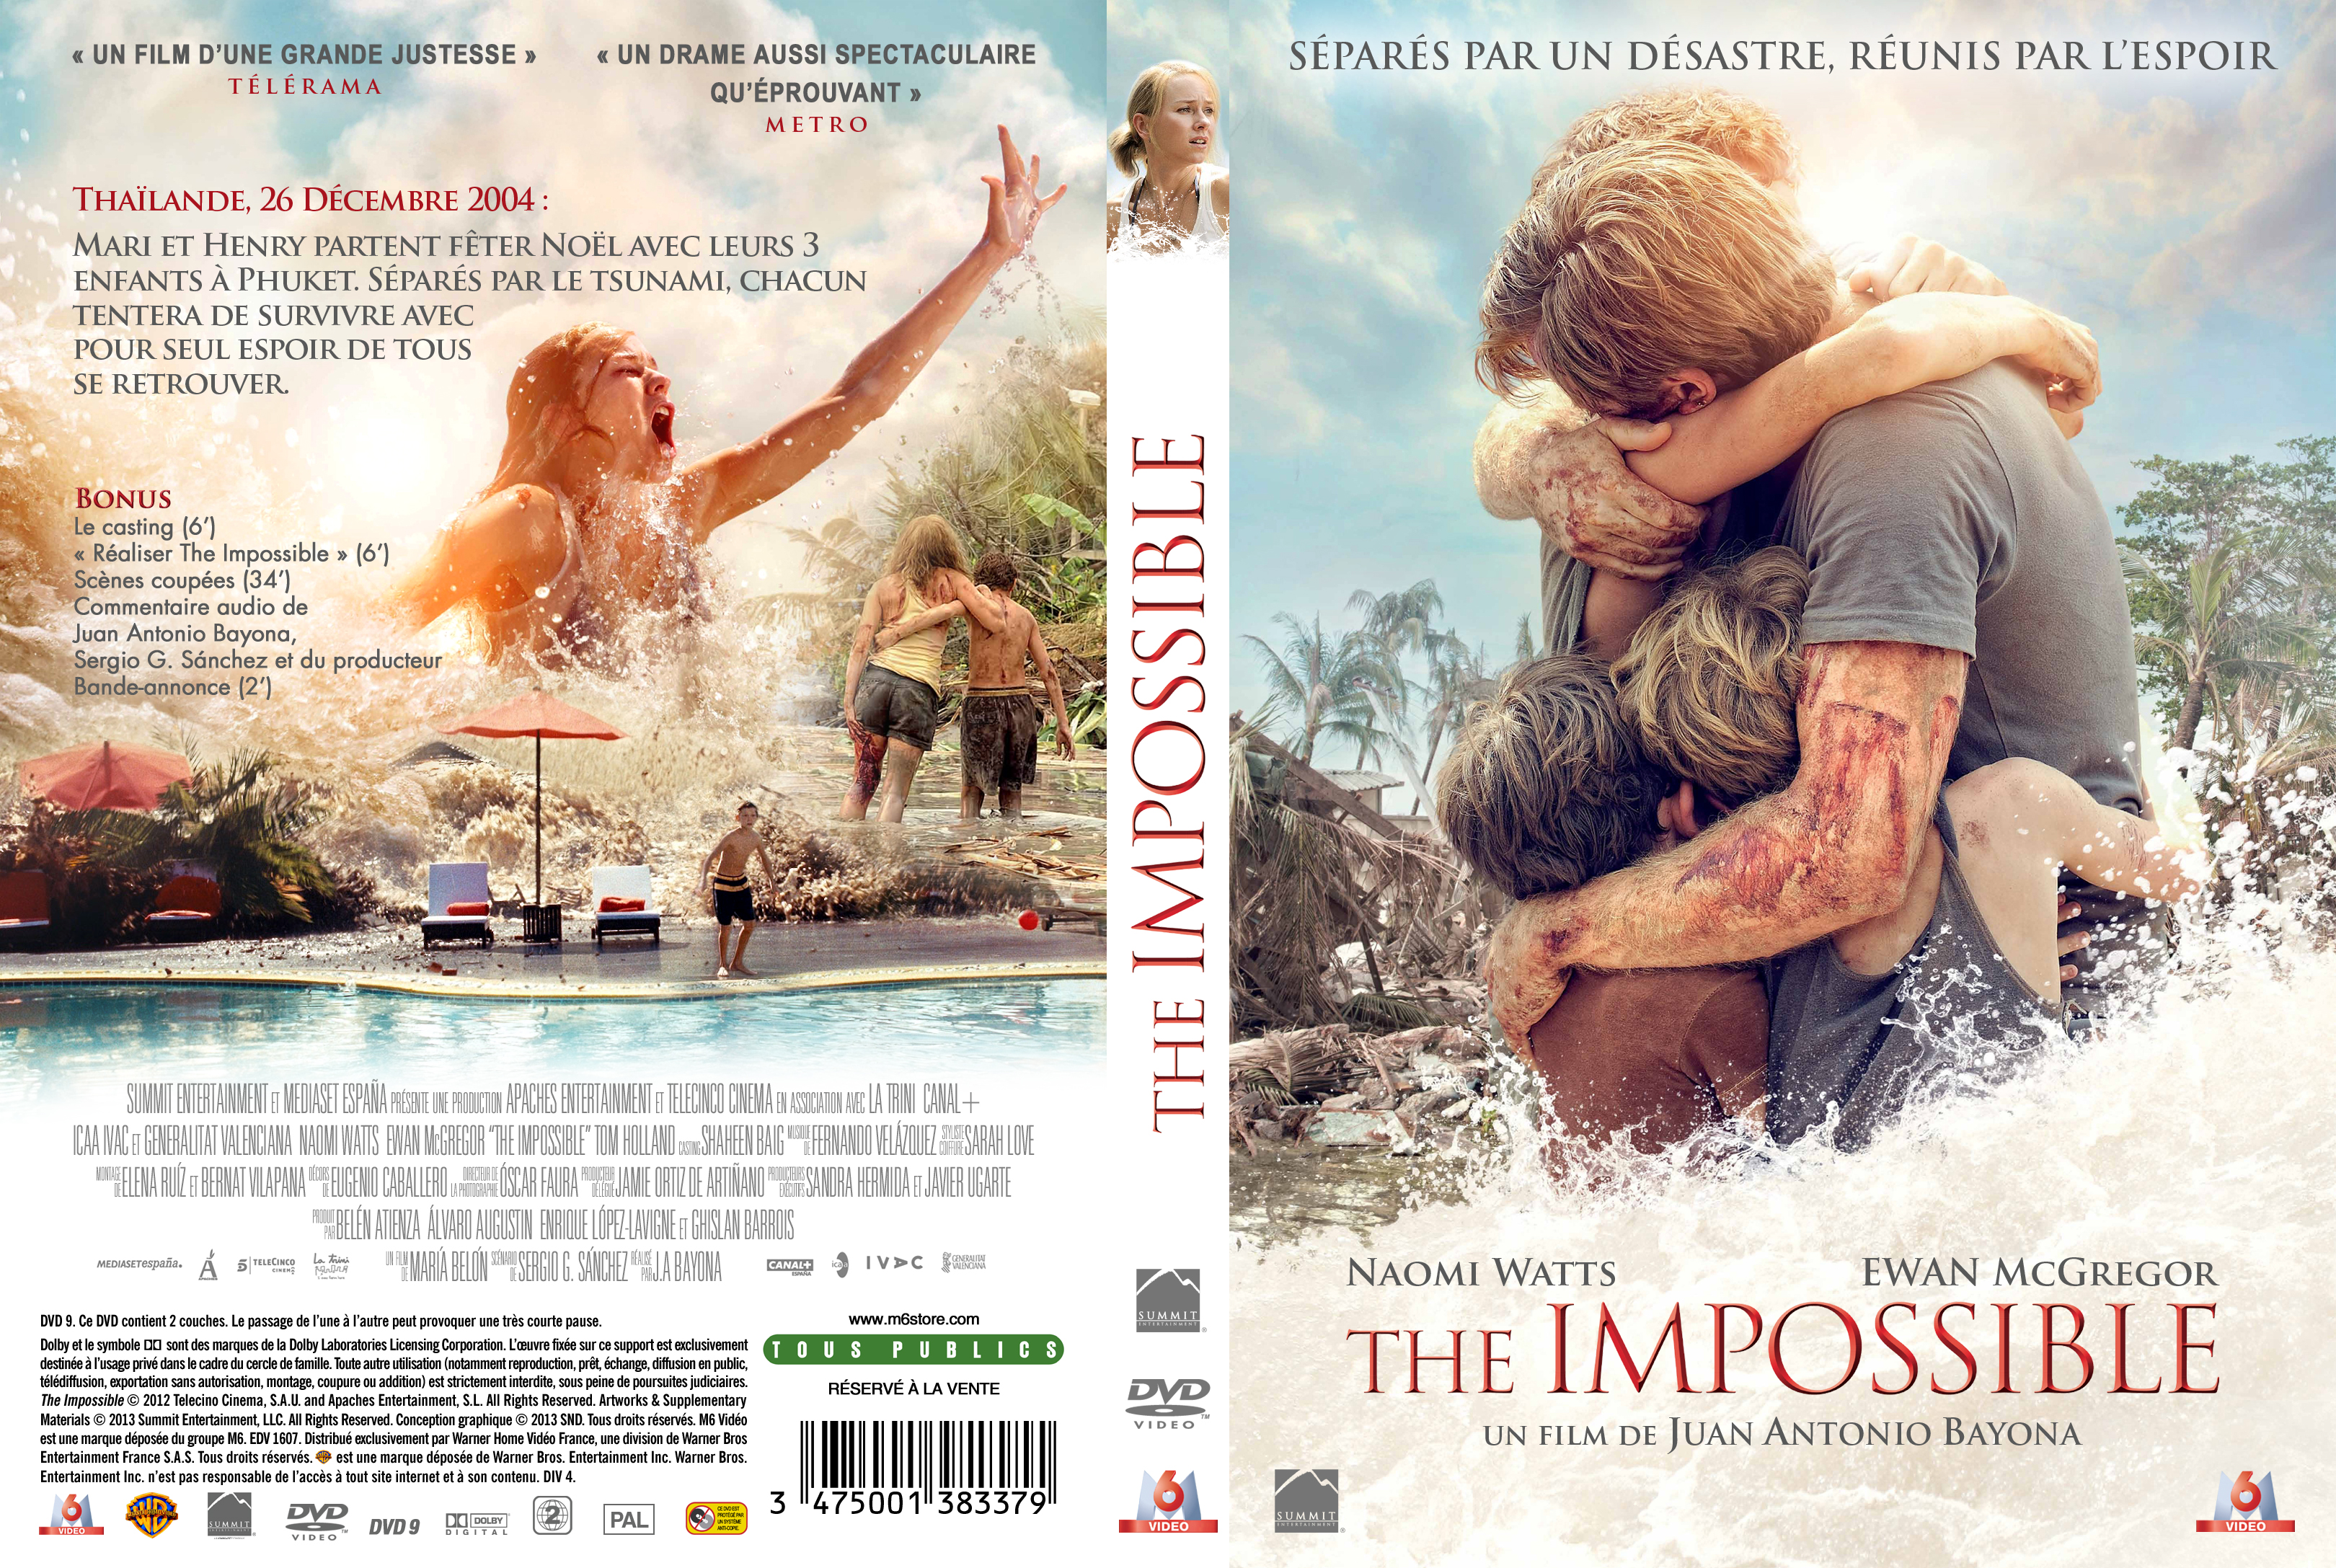 Jaquette DVD The Impossible custom